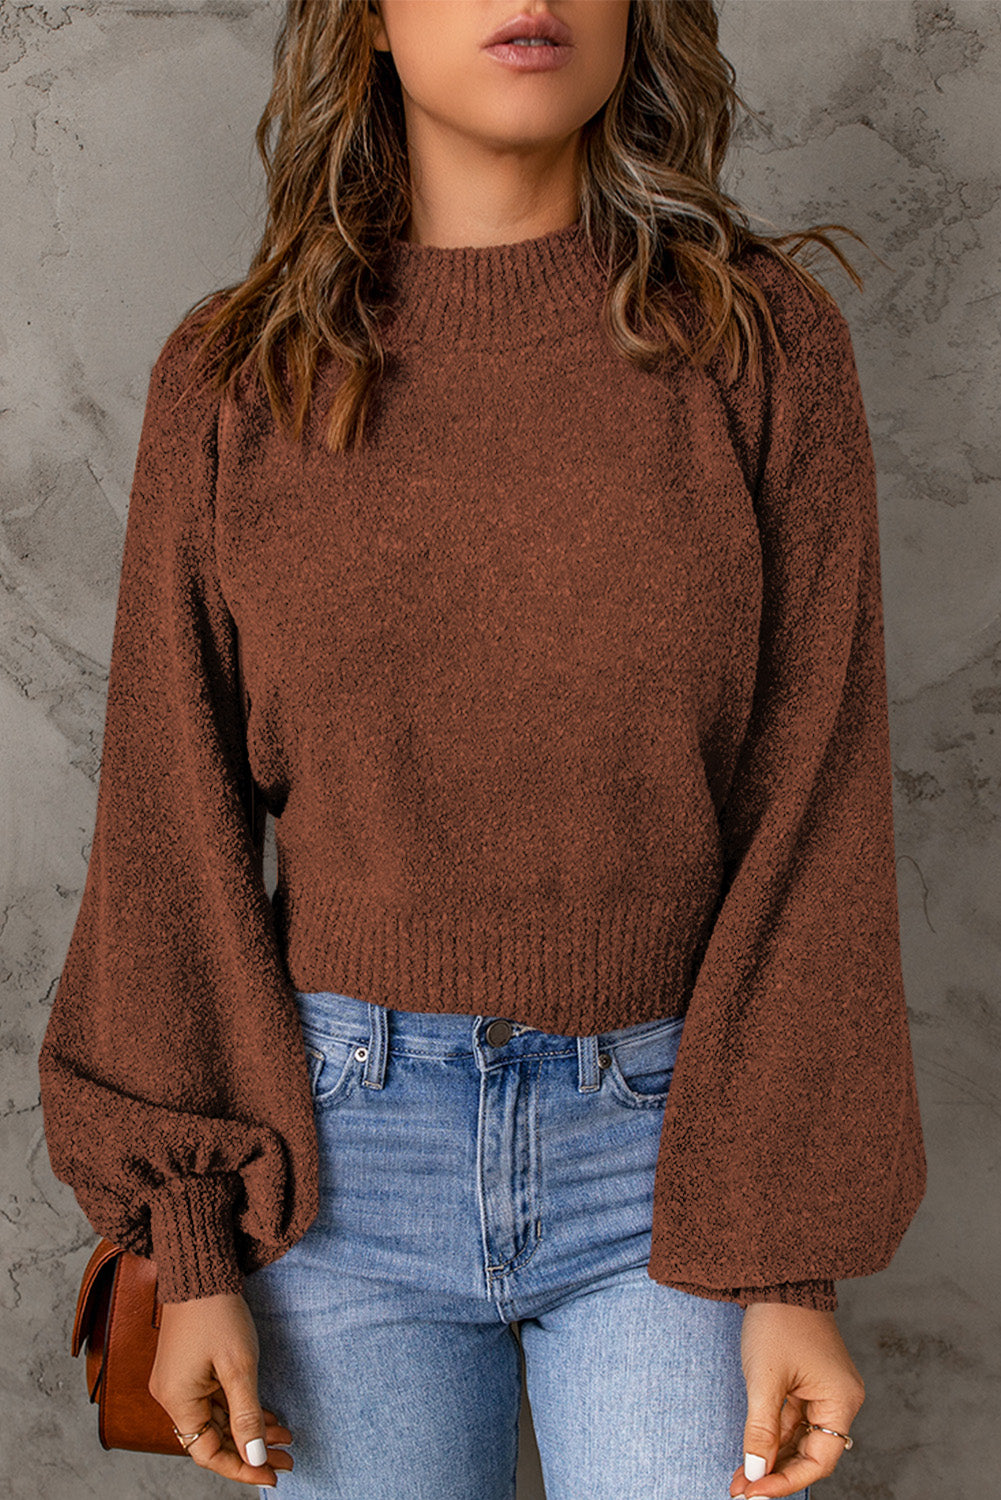 Ribbed Trim Balloon Sleeve Sweater – The Cactus Brand